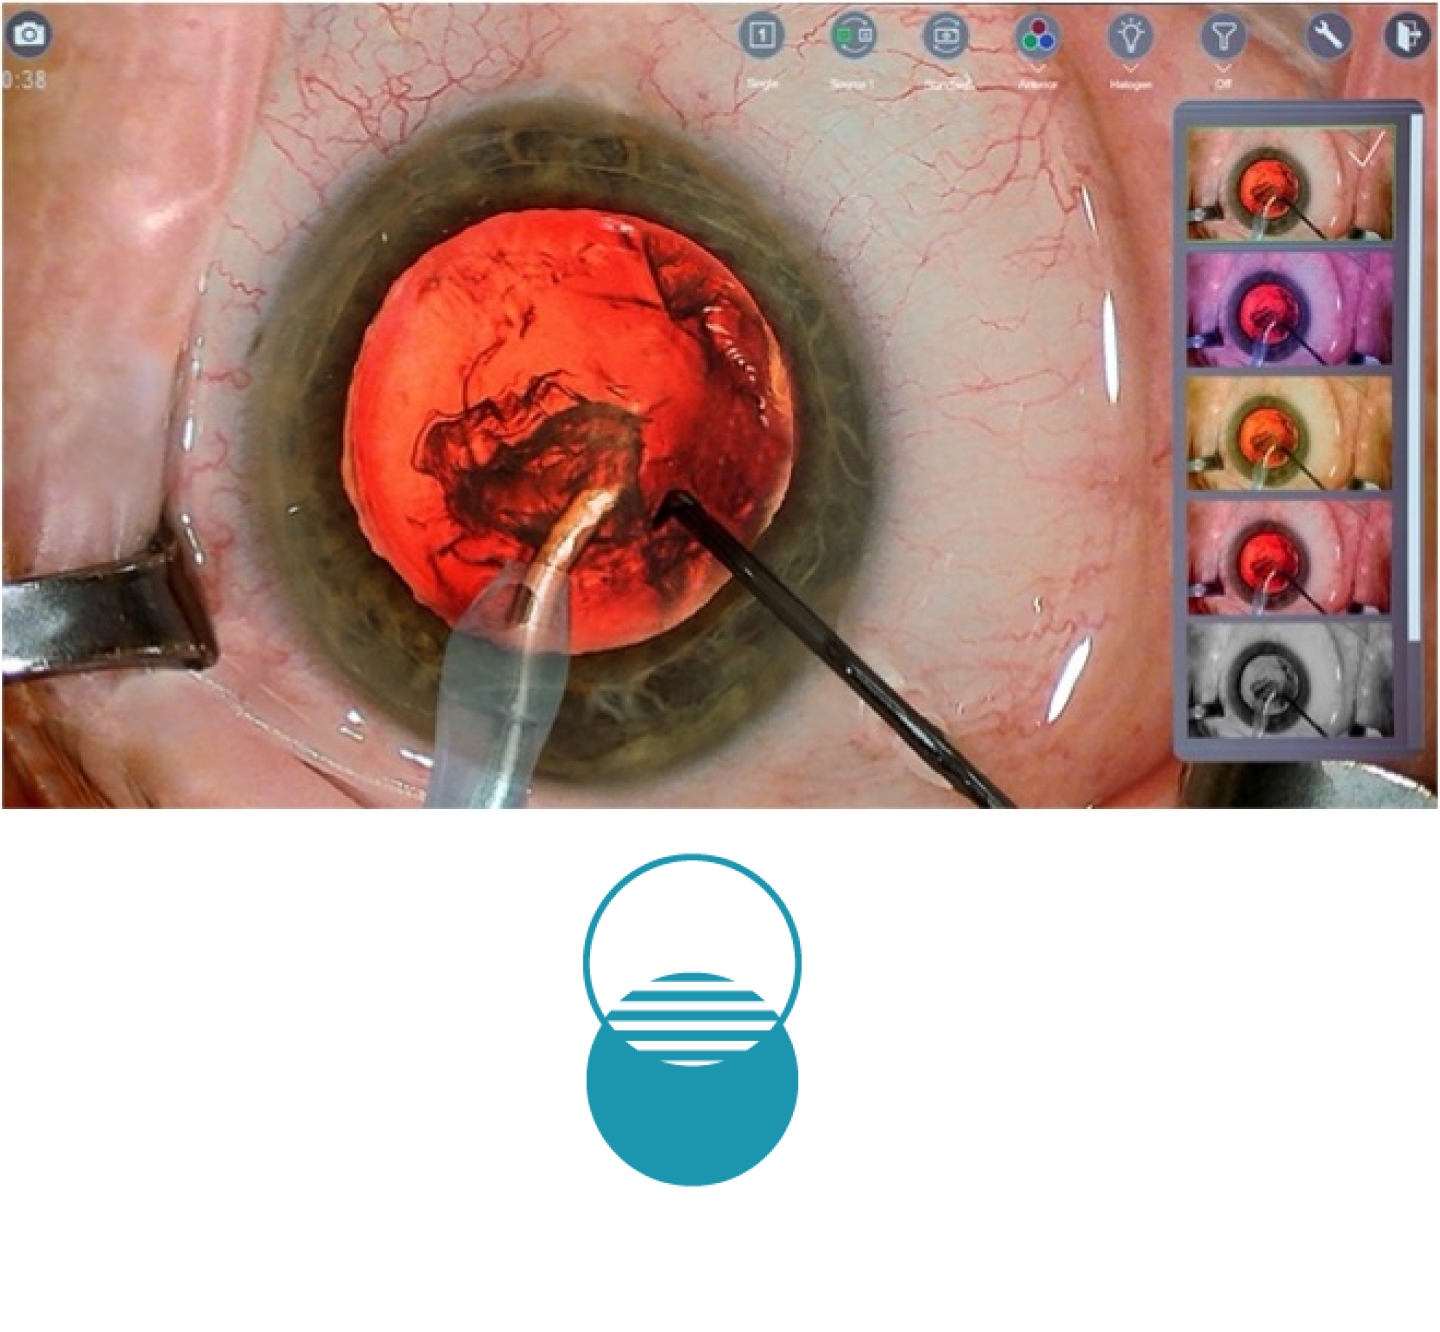 A closeup image of an eye during surgery, with surgical tools on screen. Thumbnails on the right side of the screen show the different colour filters available with NGENUITY 3D Visualization System. A blue icon showing two circles overlapping each other 